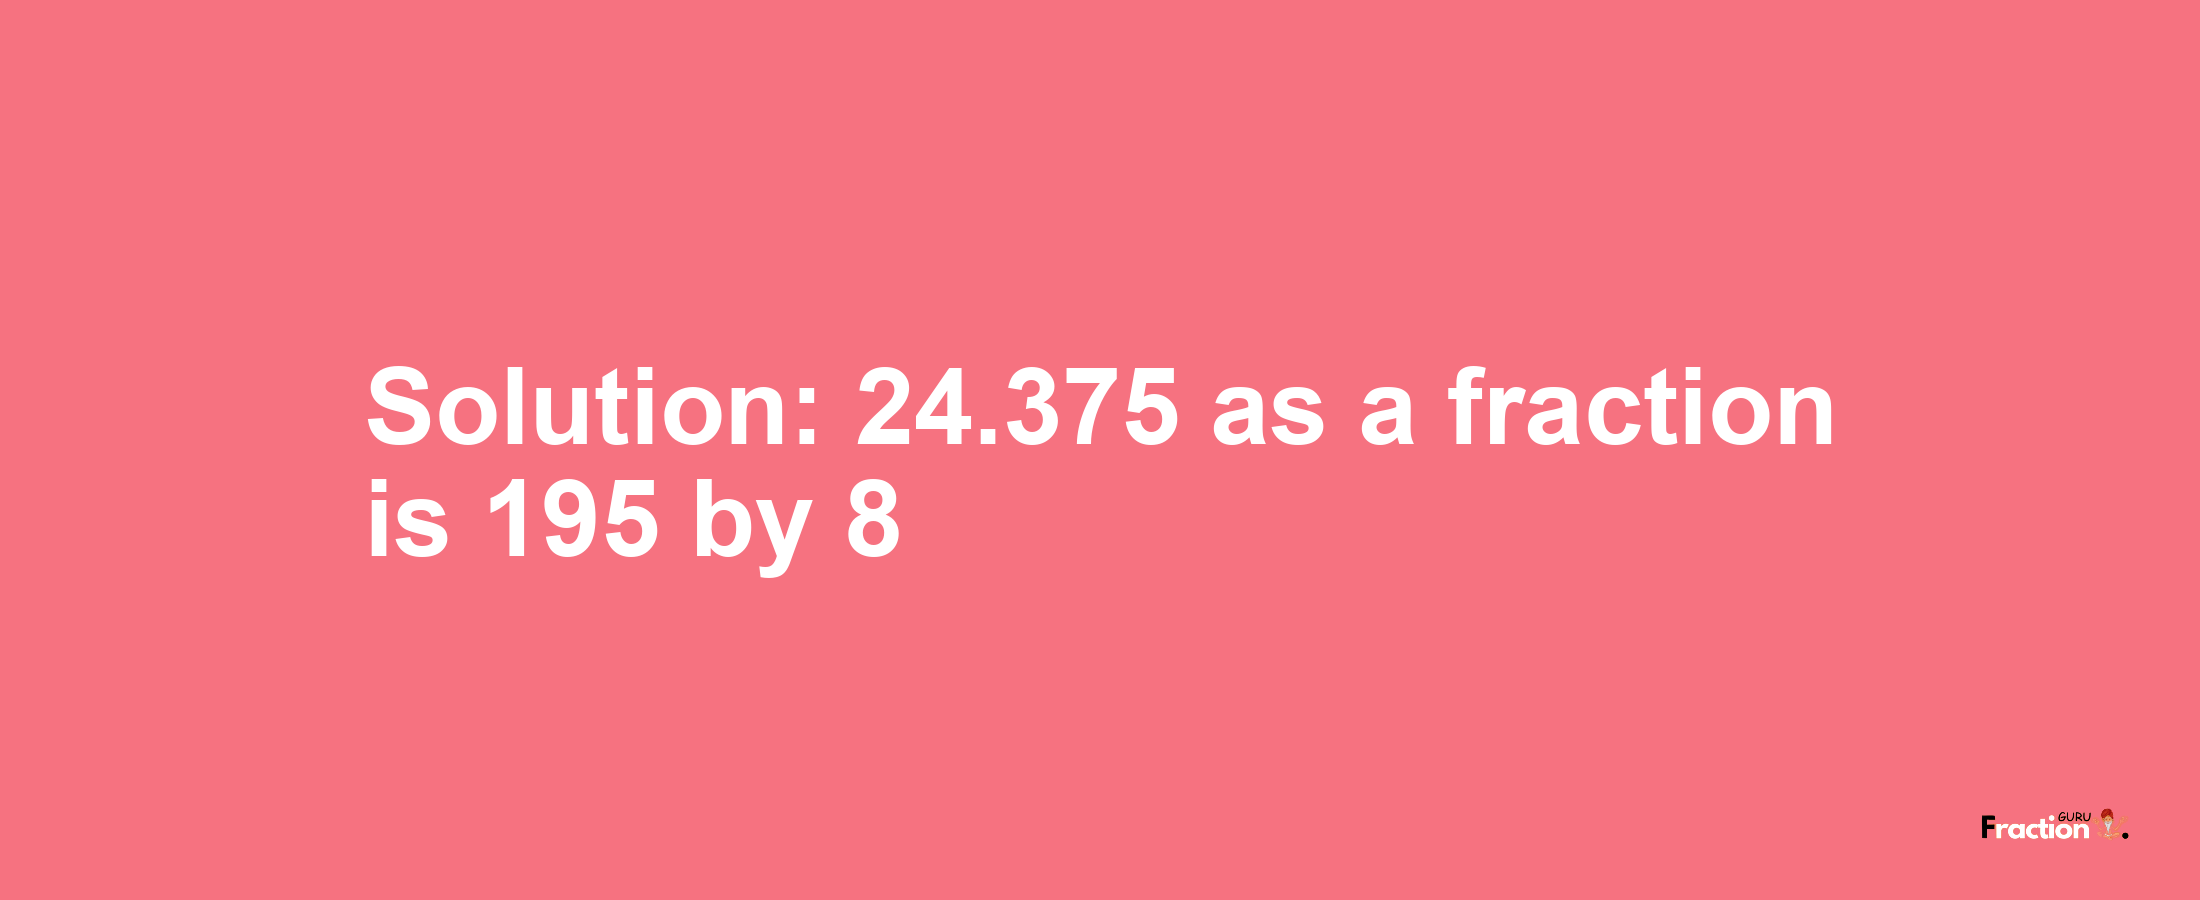 Solution:24.375 as a fraction is 195/8